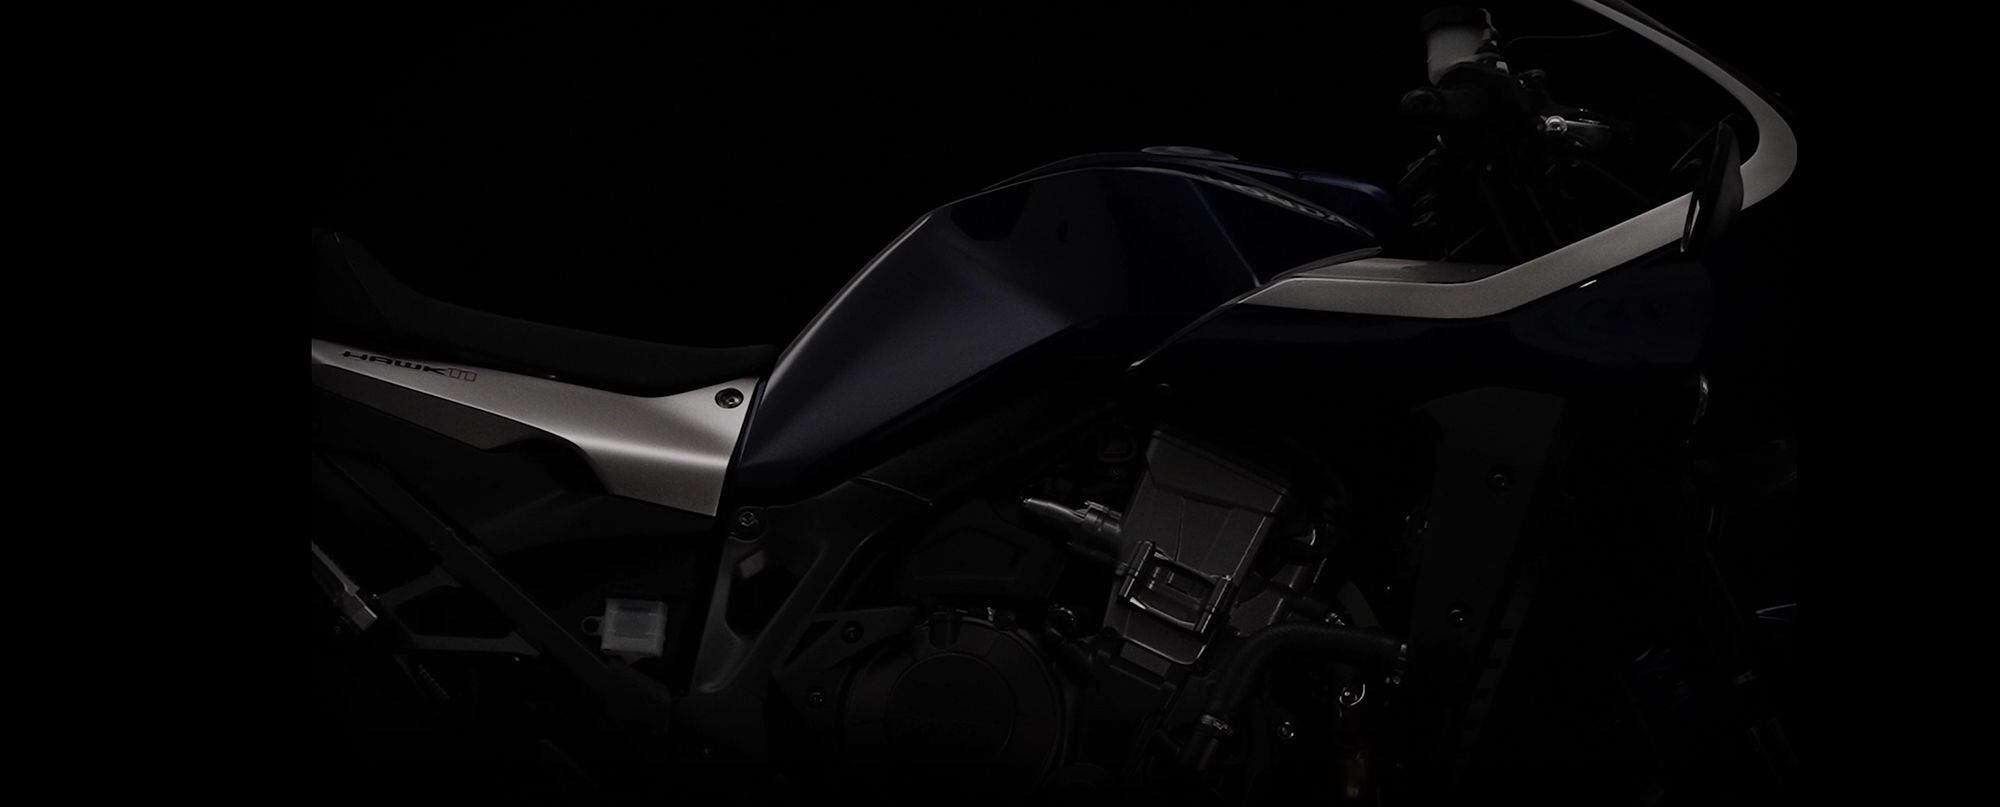 Front of the exhaust looks identical to the Africa Twin’s suggesting the engine carries over relatively unchanged.